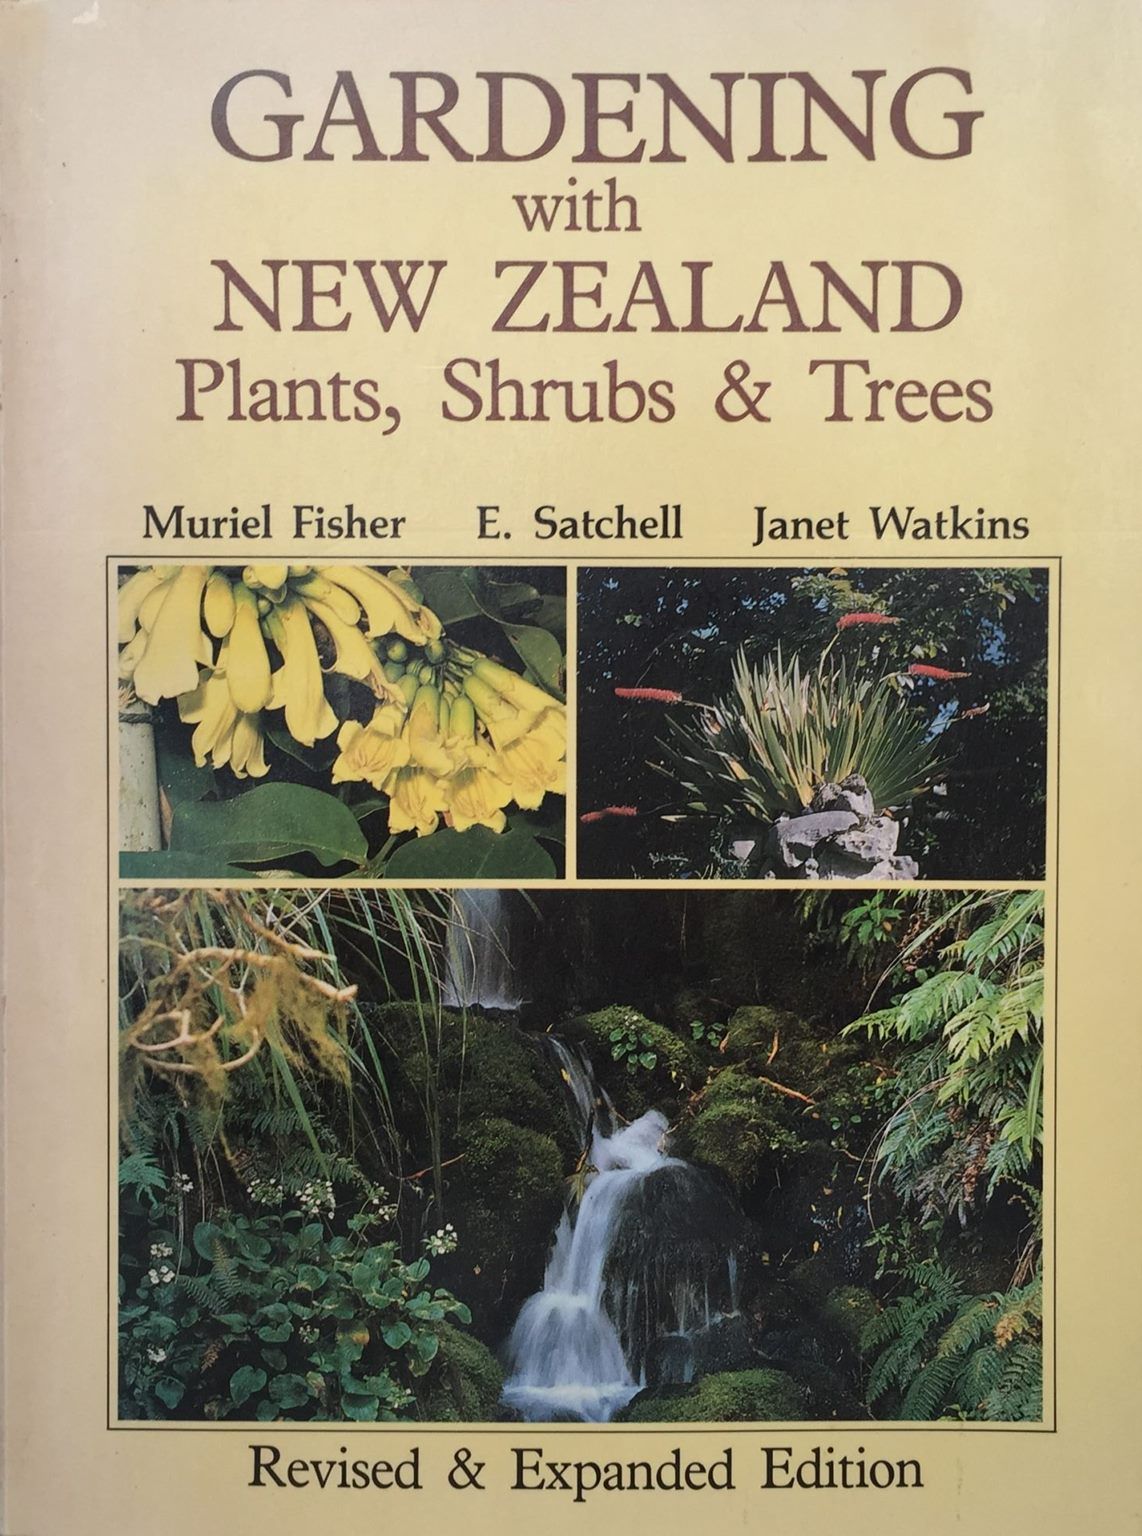 GARDENING WITH NEW ZEALAND FERNS: Plants, Shrubs & Trees